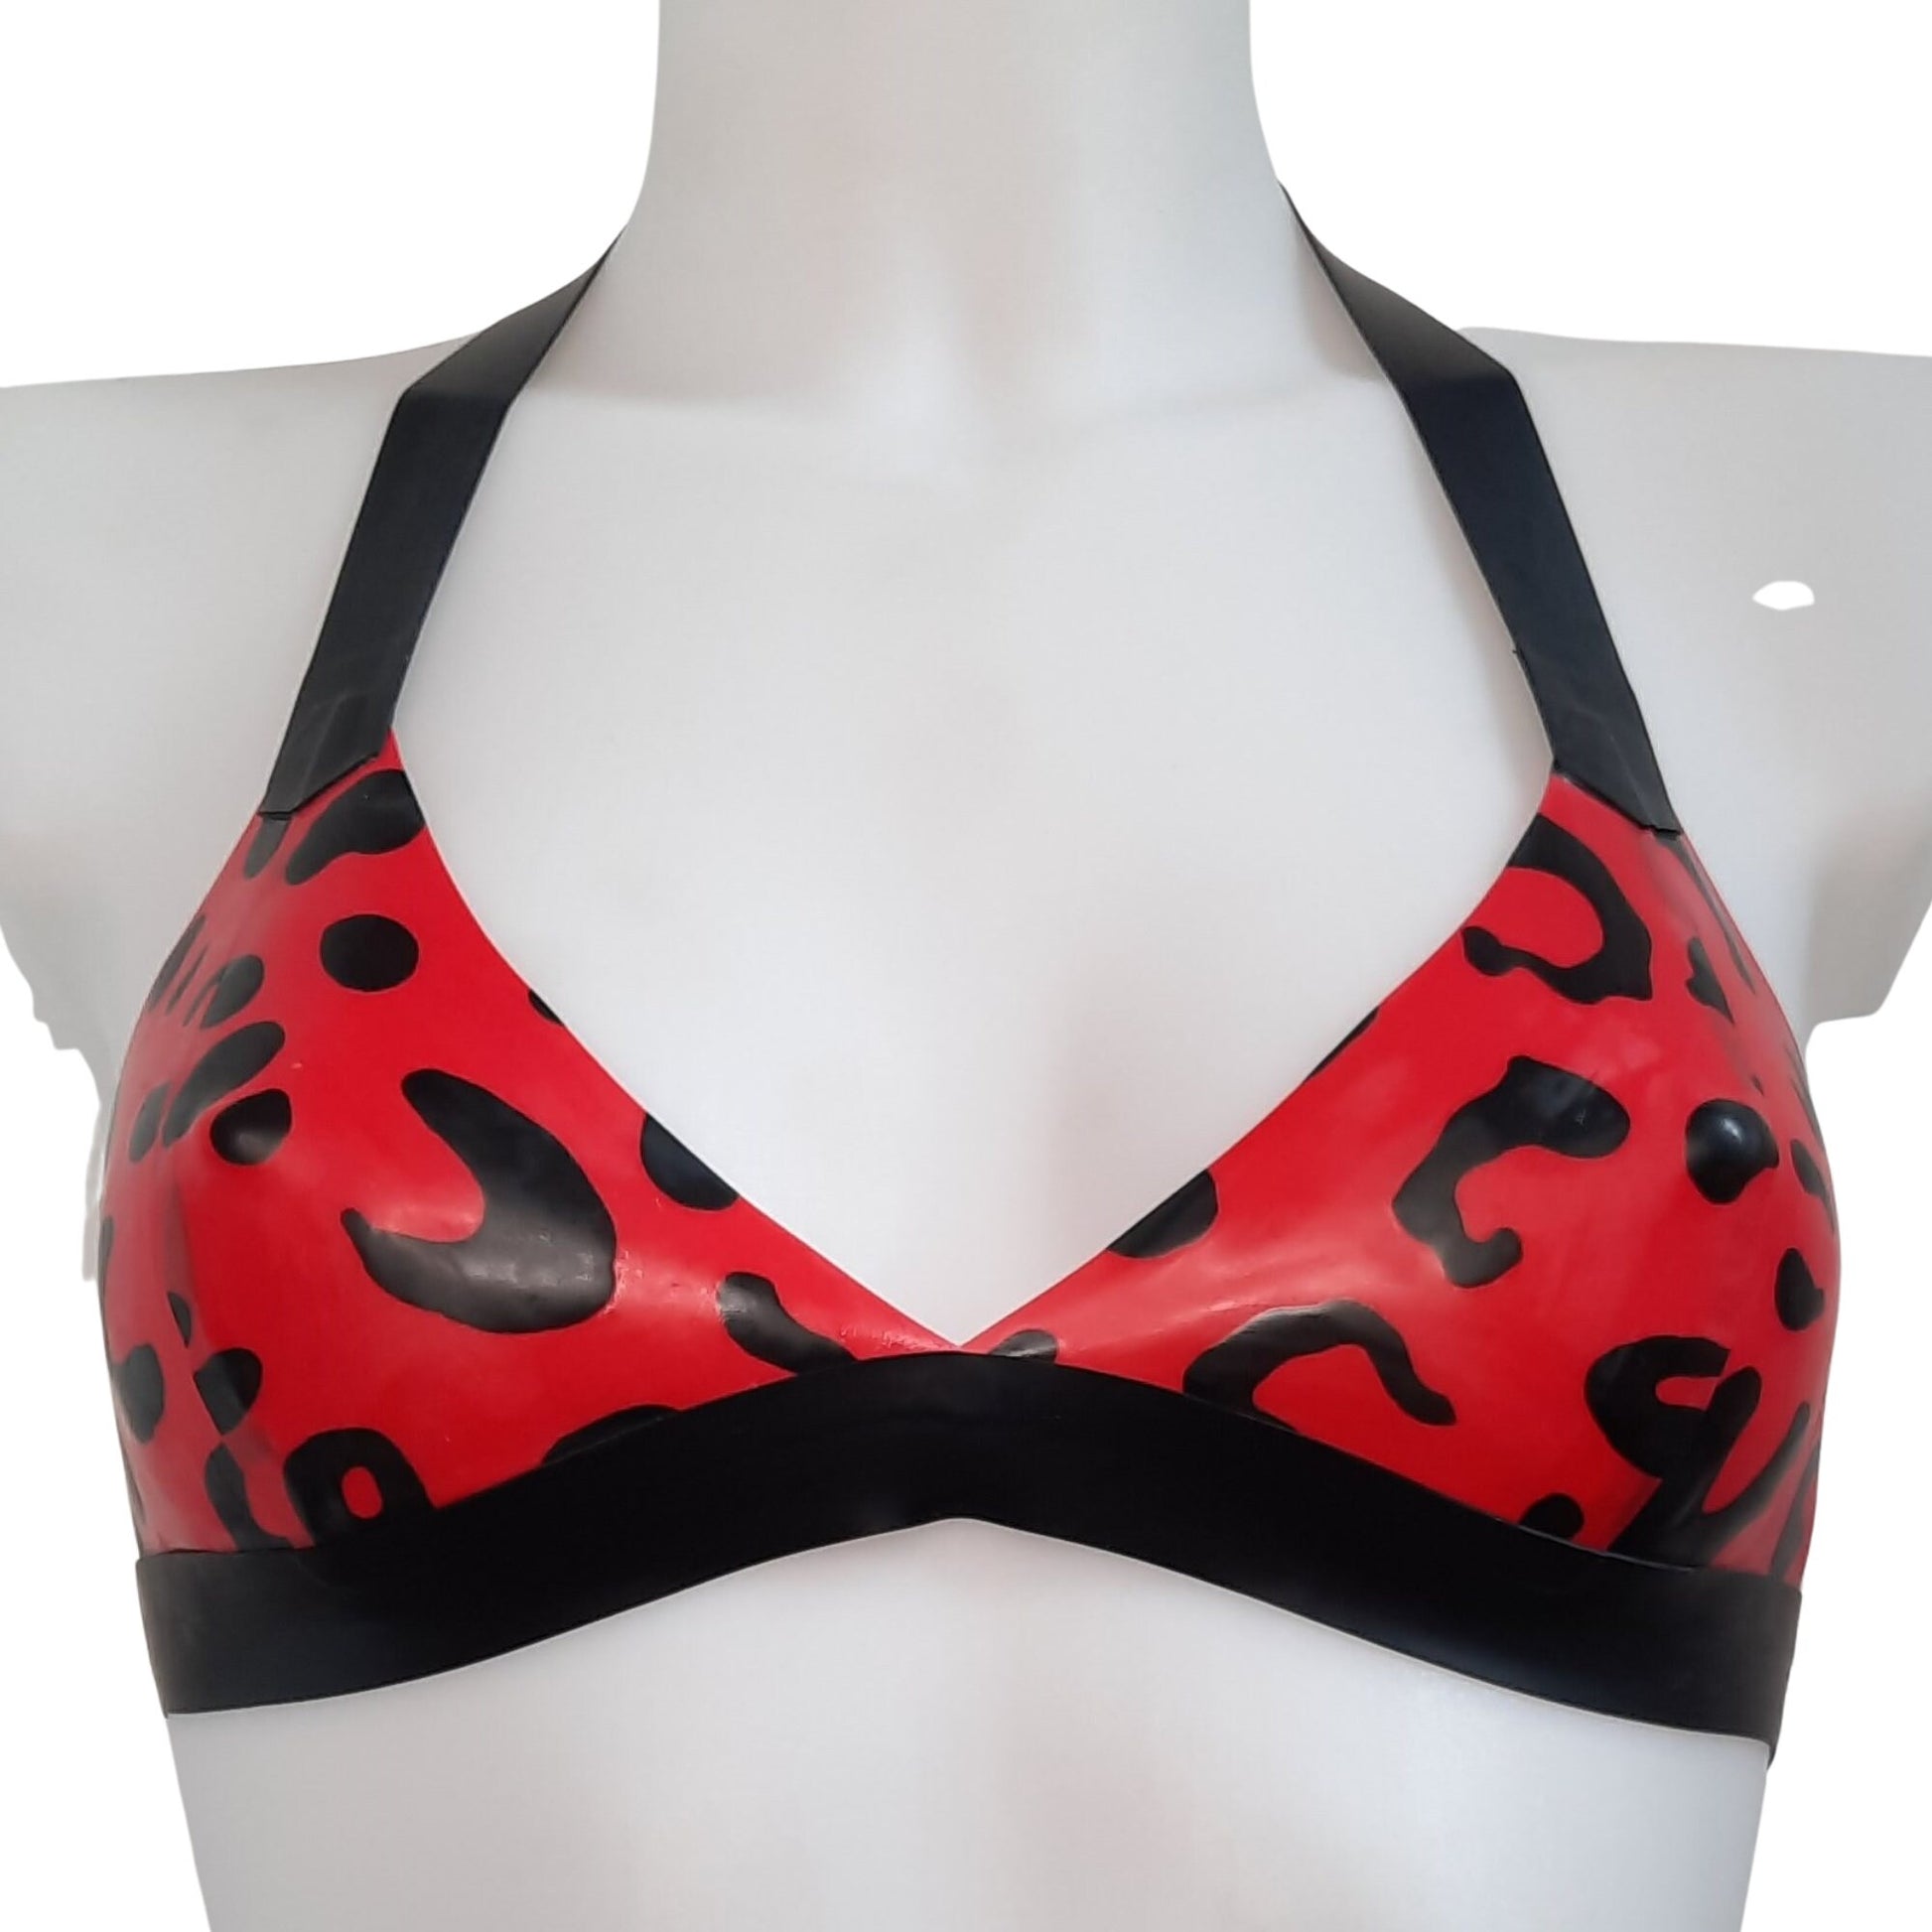 Custom Made Latex Rubber Bra With Underwire in Any Colour 